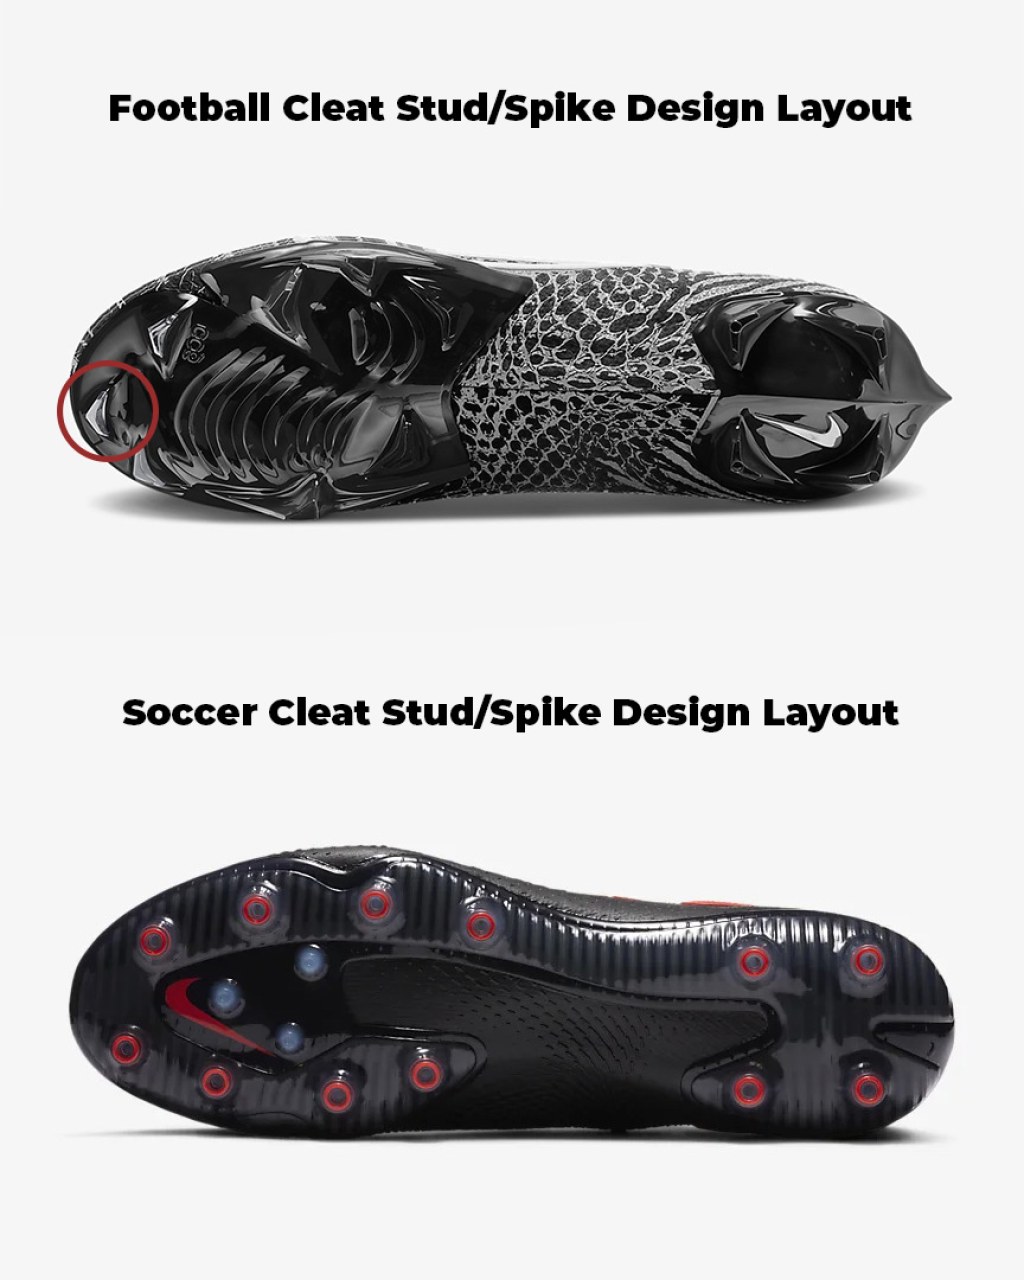 Picture of: Soccer Cleats vs Football Cleats – What’s the difference